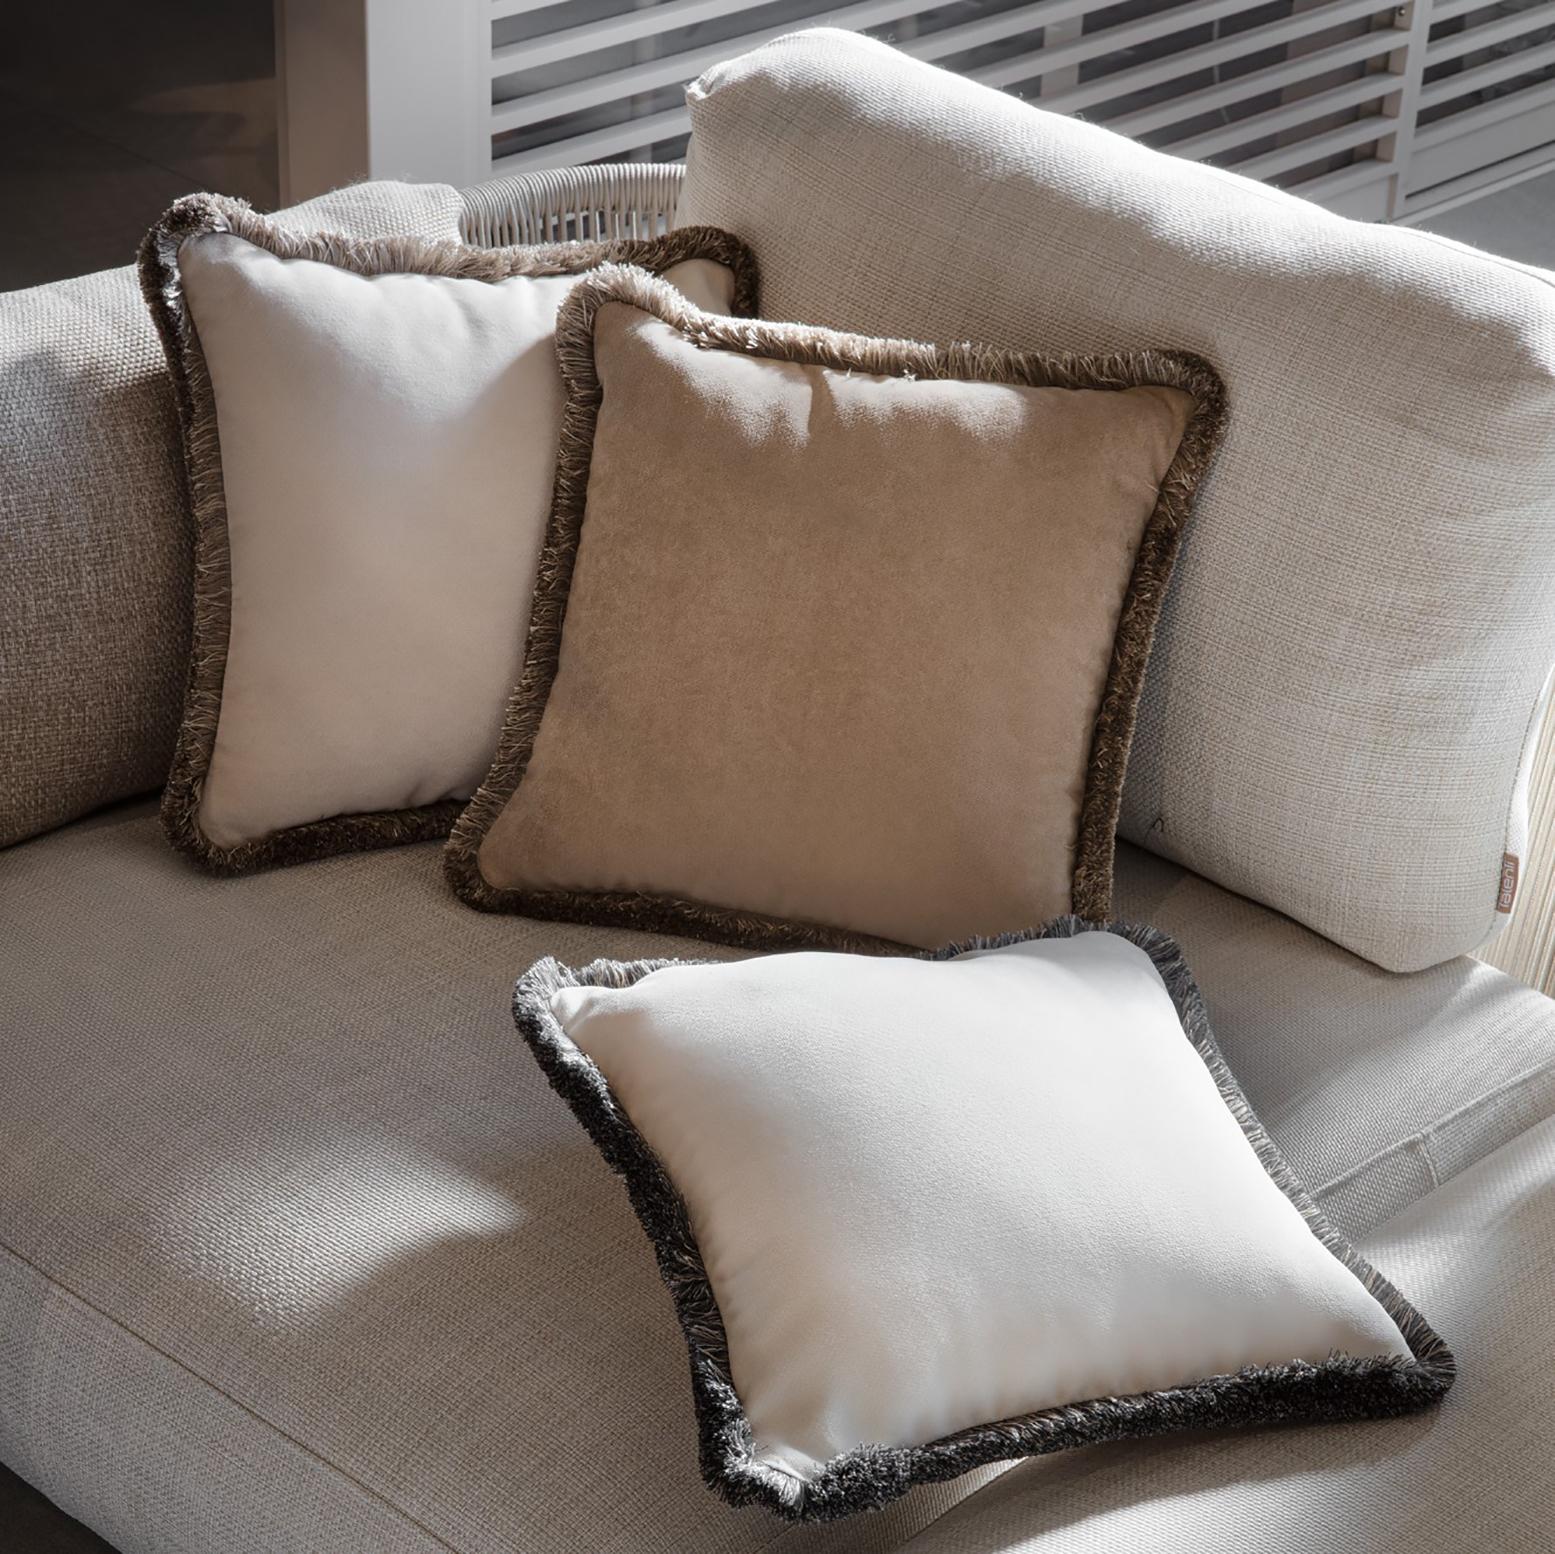 This elegant cushion from the limited-edition Artic Collection is a romantic accent piece that will make a glamorous statement in any interior decor.
The antique-white hue of its removable velvet cover combines with the bold border of colorful